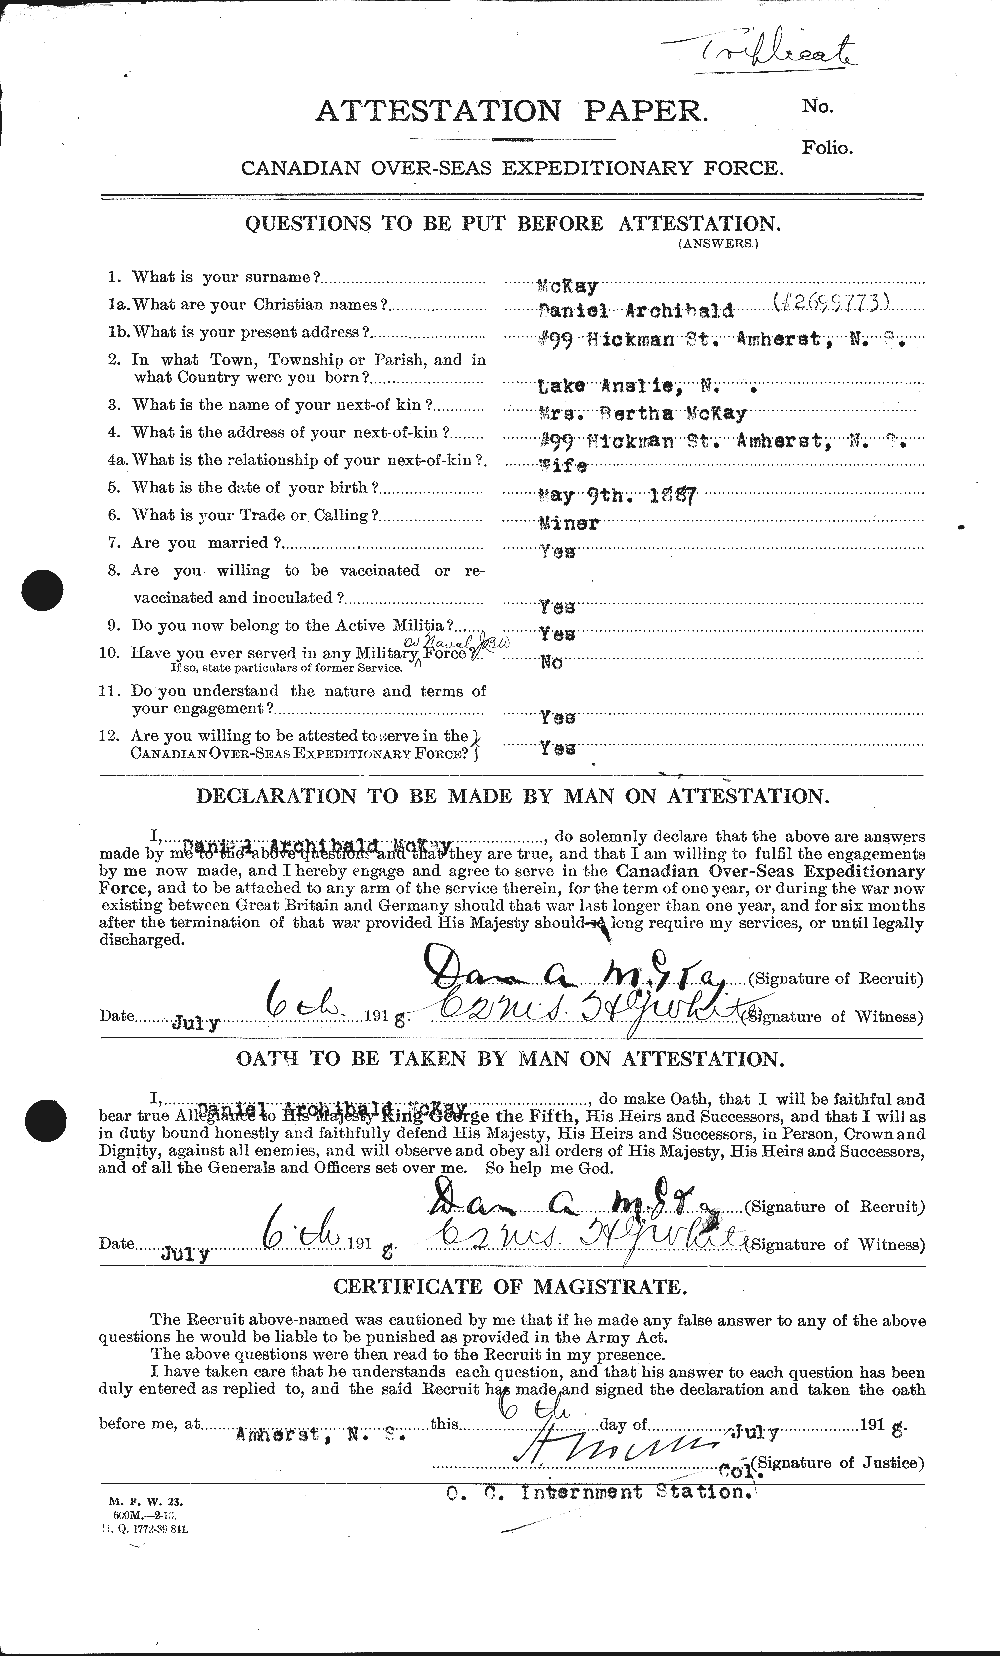 Personnel Records of the First World War - CEF 531115a